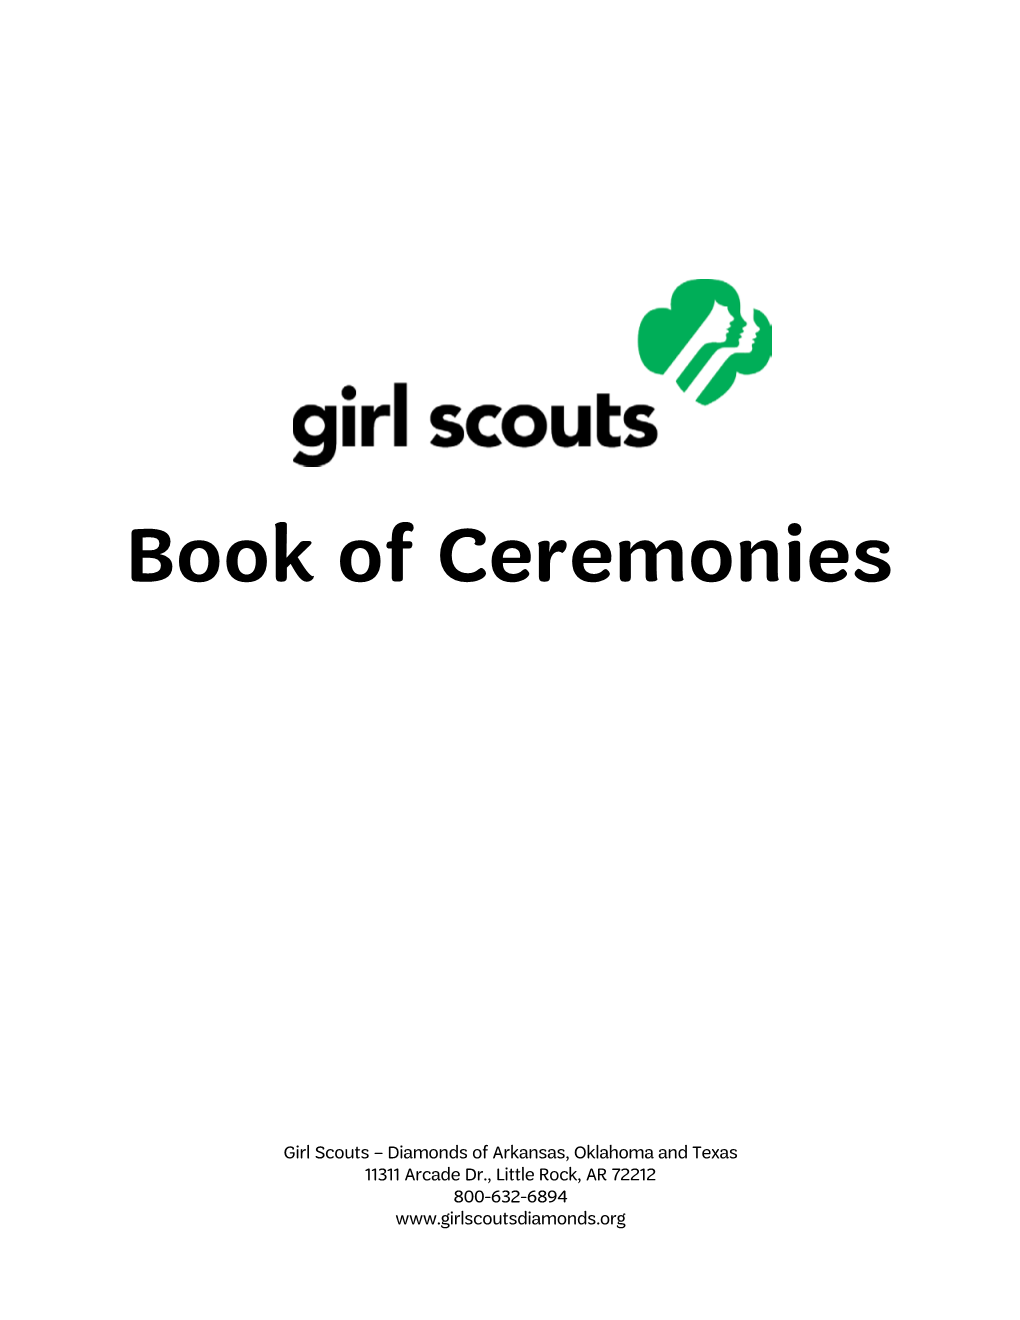 Girl Scout Ceremonies Can Be Planned on a Grand Scale to Celebrate Major Transitions (Such As Awards, Bridging, Investitures, and End-Of-Year Activities)